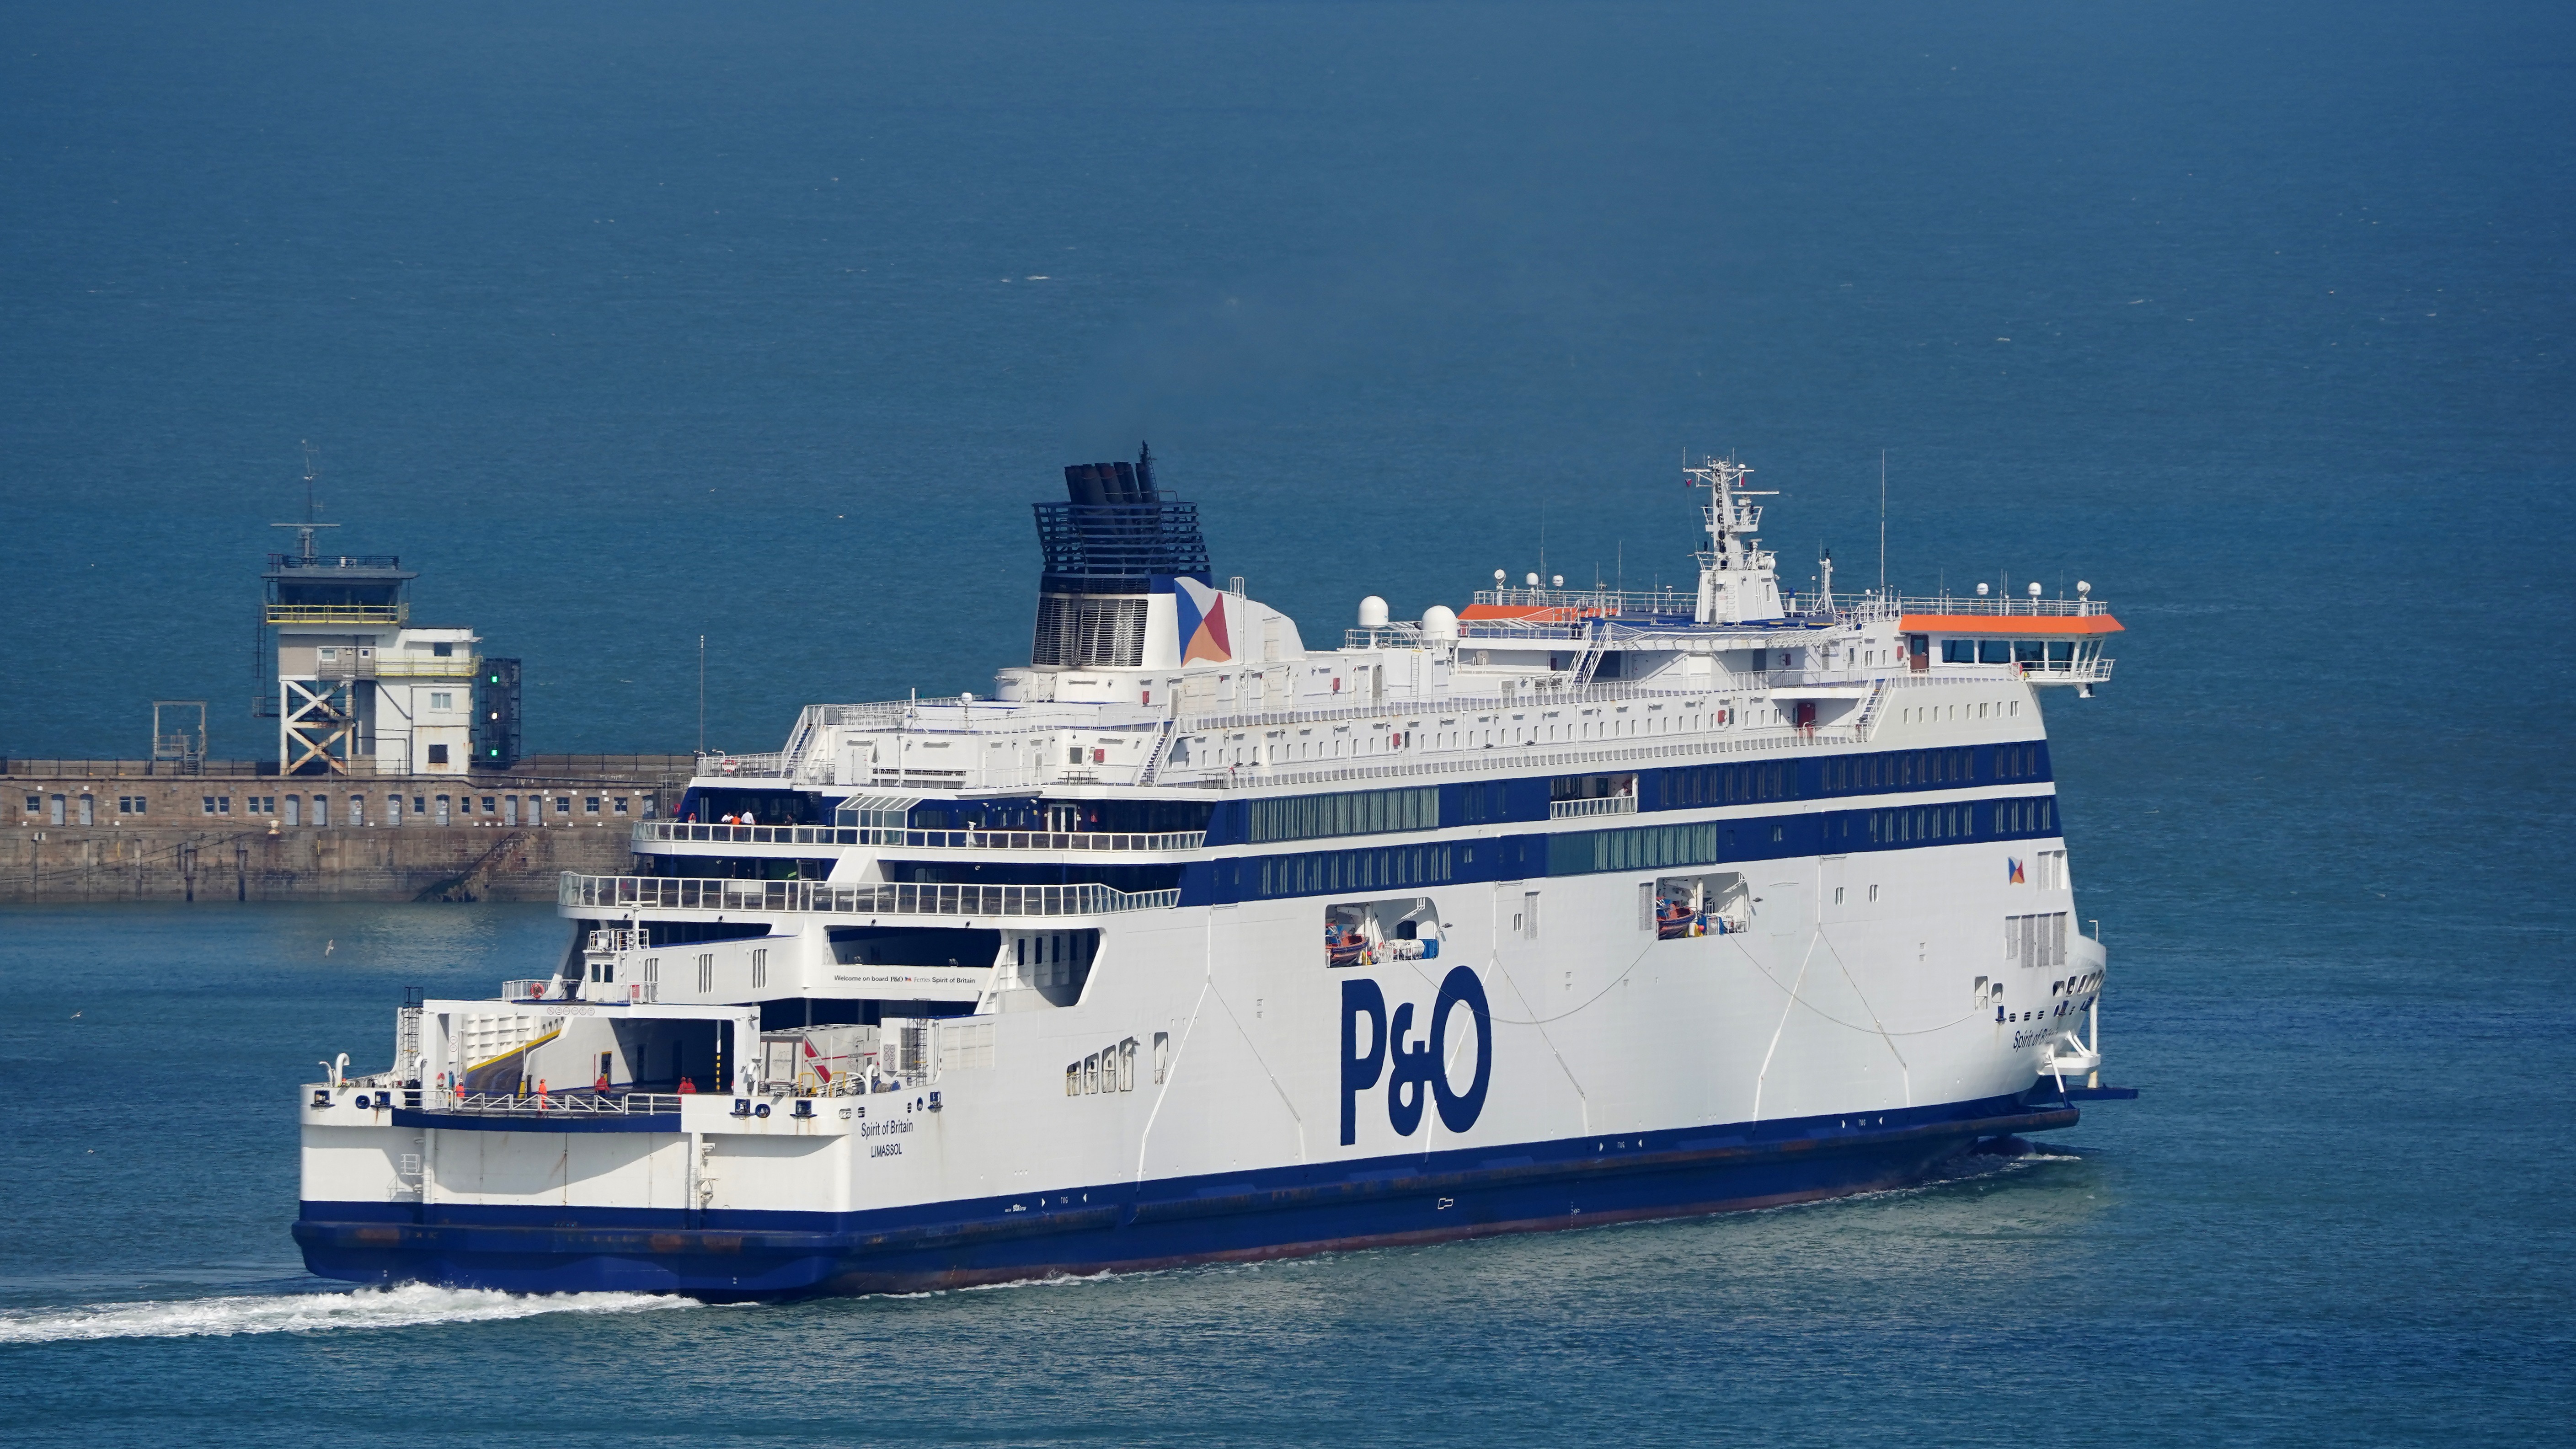 P&O ferries struggles to win back customers 10 weeks after sacking 800 crew | ITV News